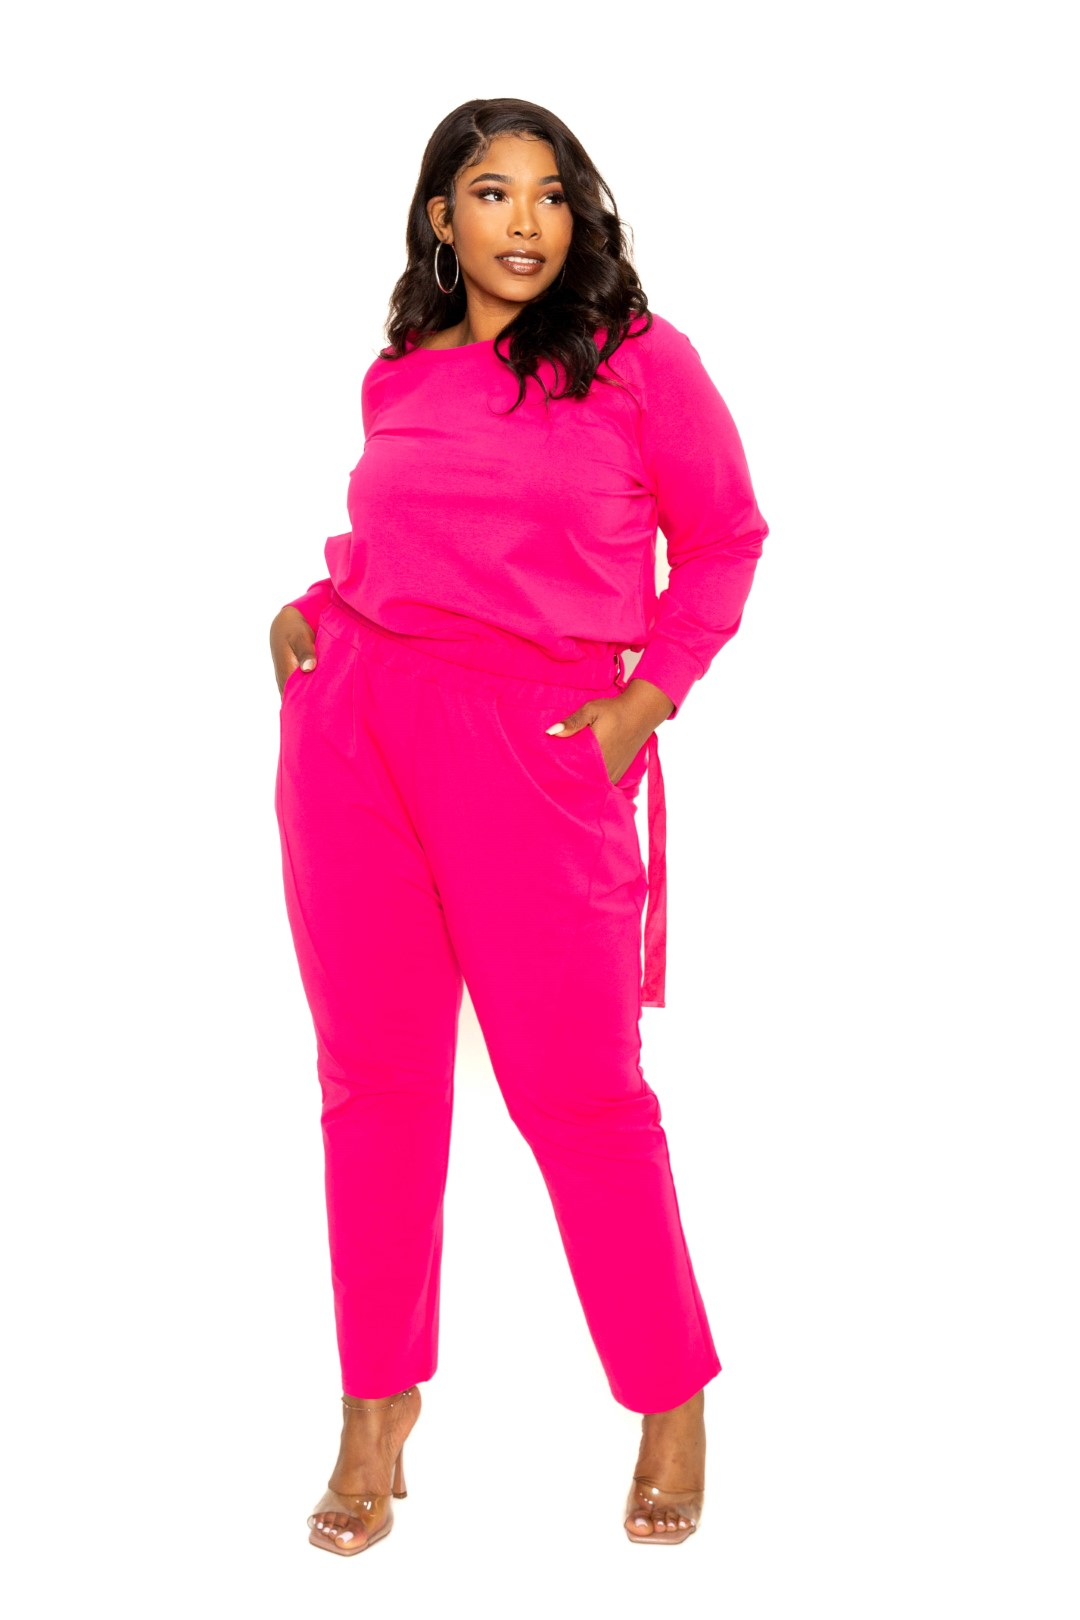 Classy Casual Hot Pink Lounge Outfit ( XL - 3X)